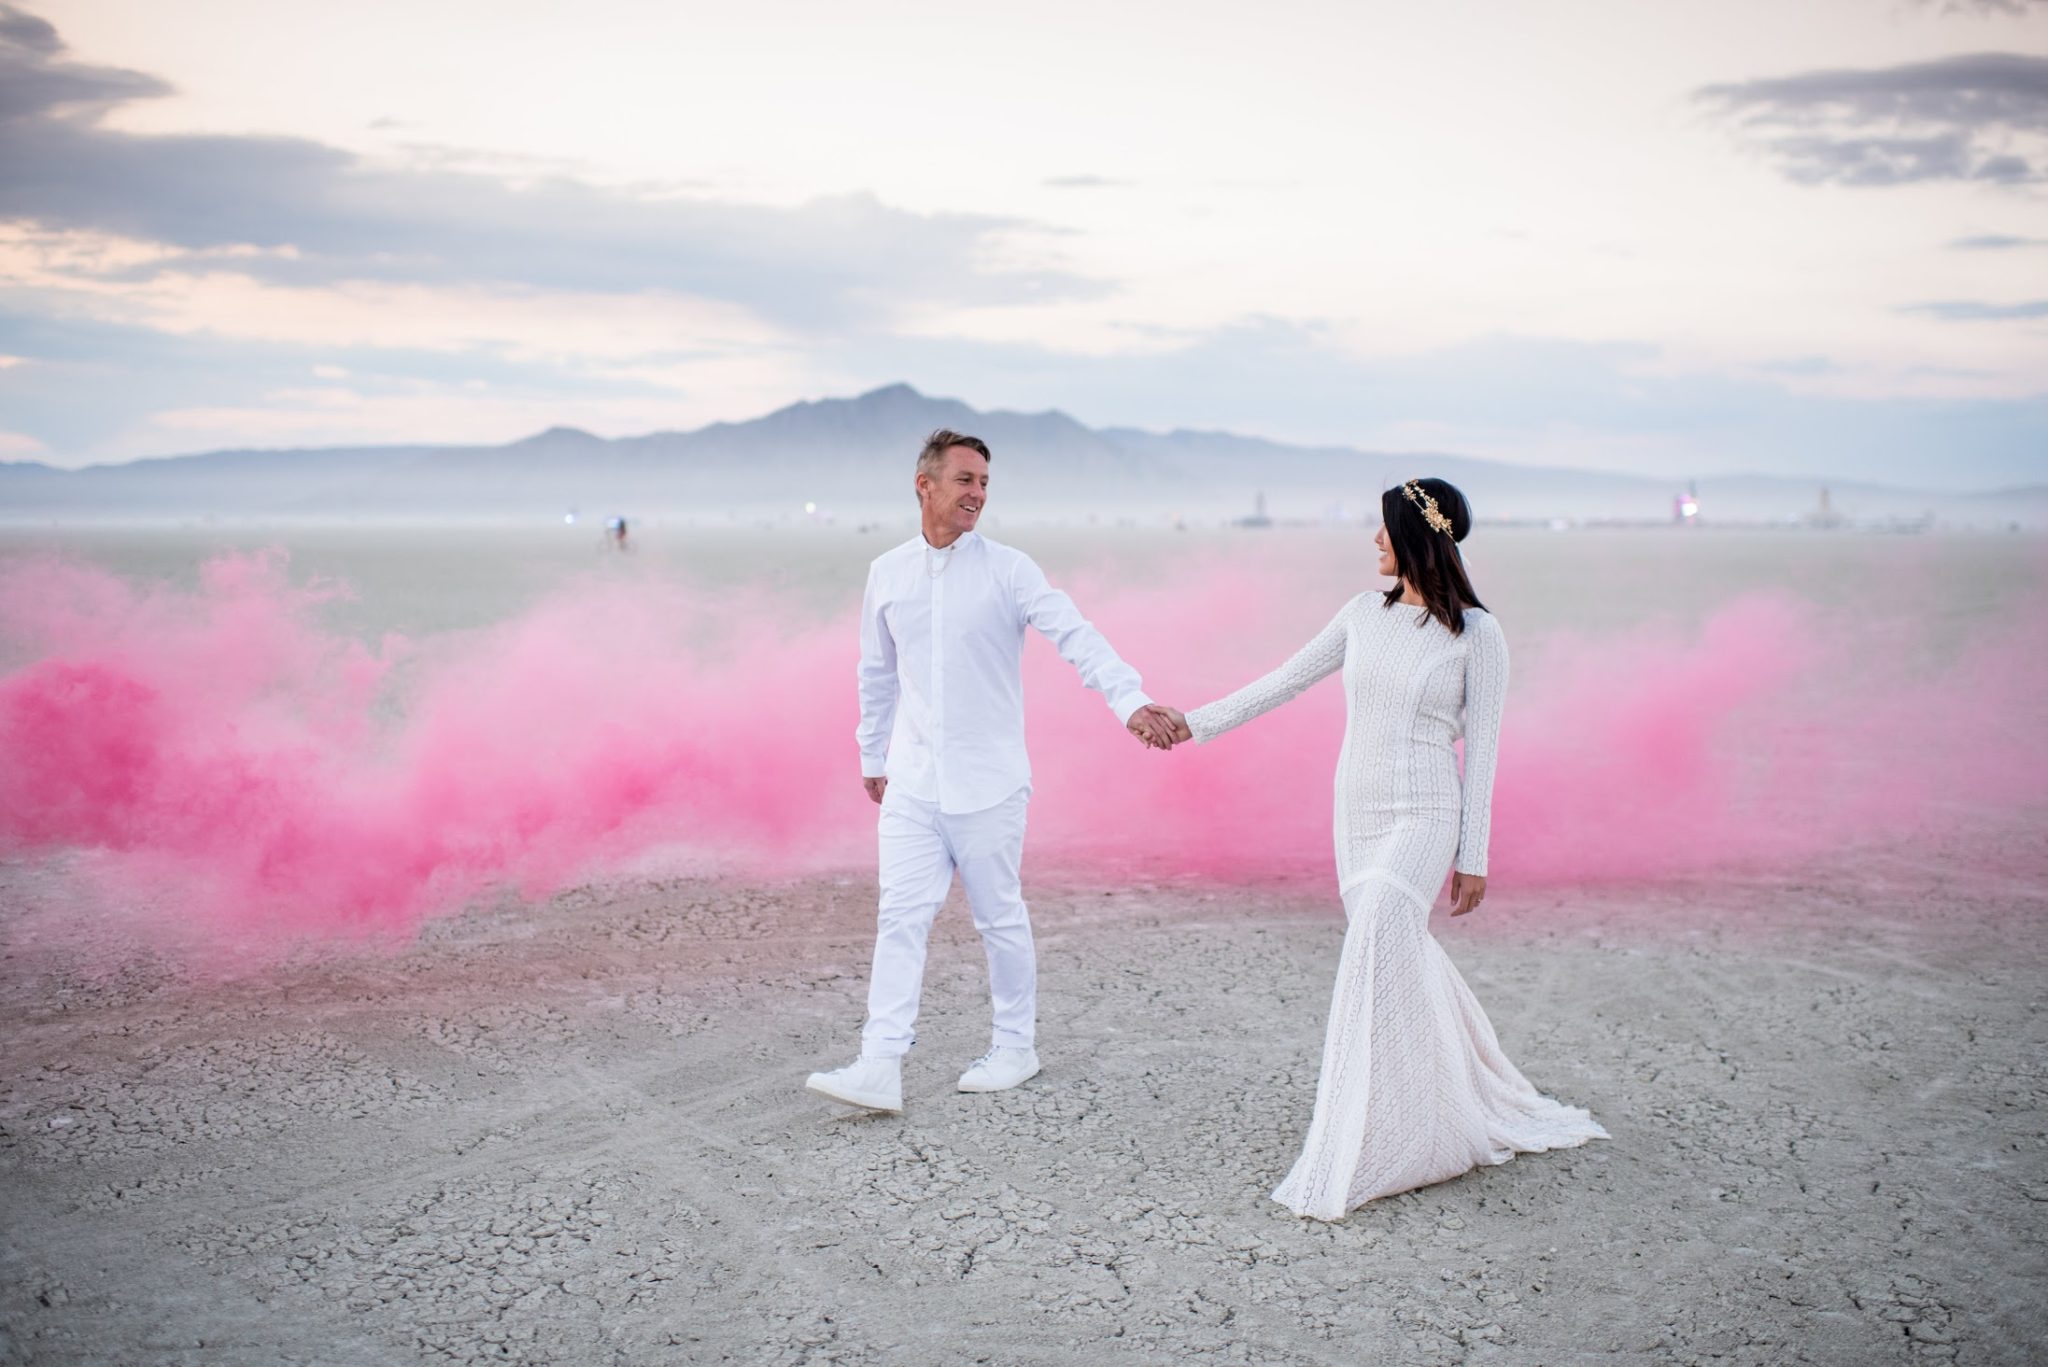 A man and a woman in white wedding clothes hold hands and look at each other as they walk in front of a pink smoke cloud in the desert.